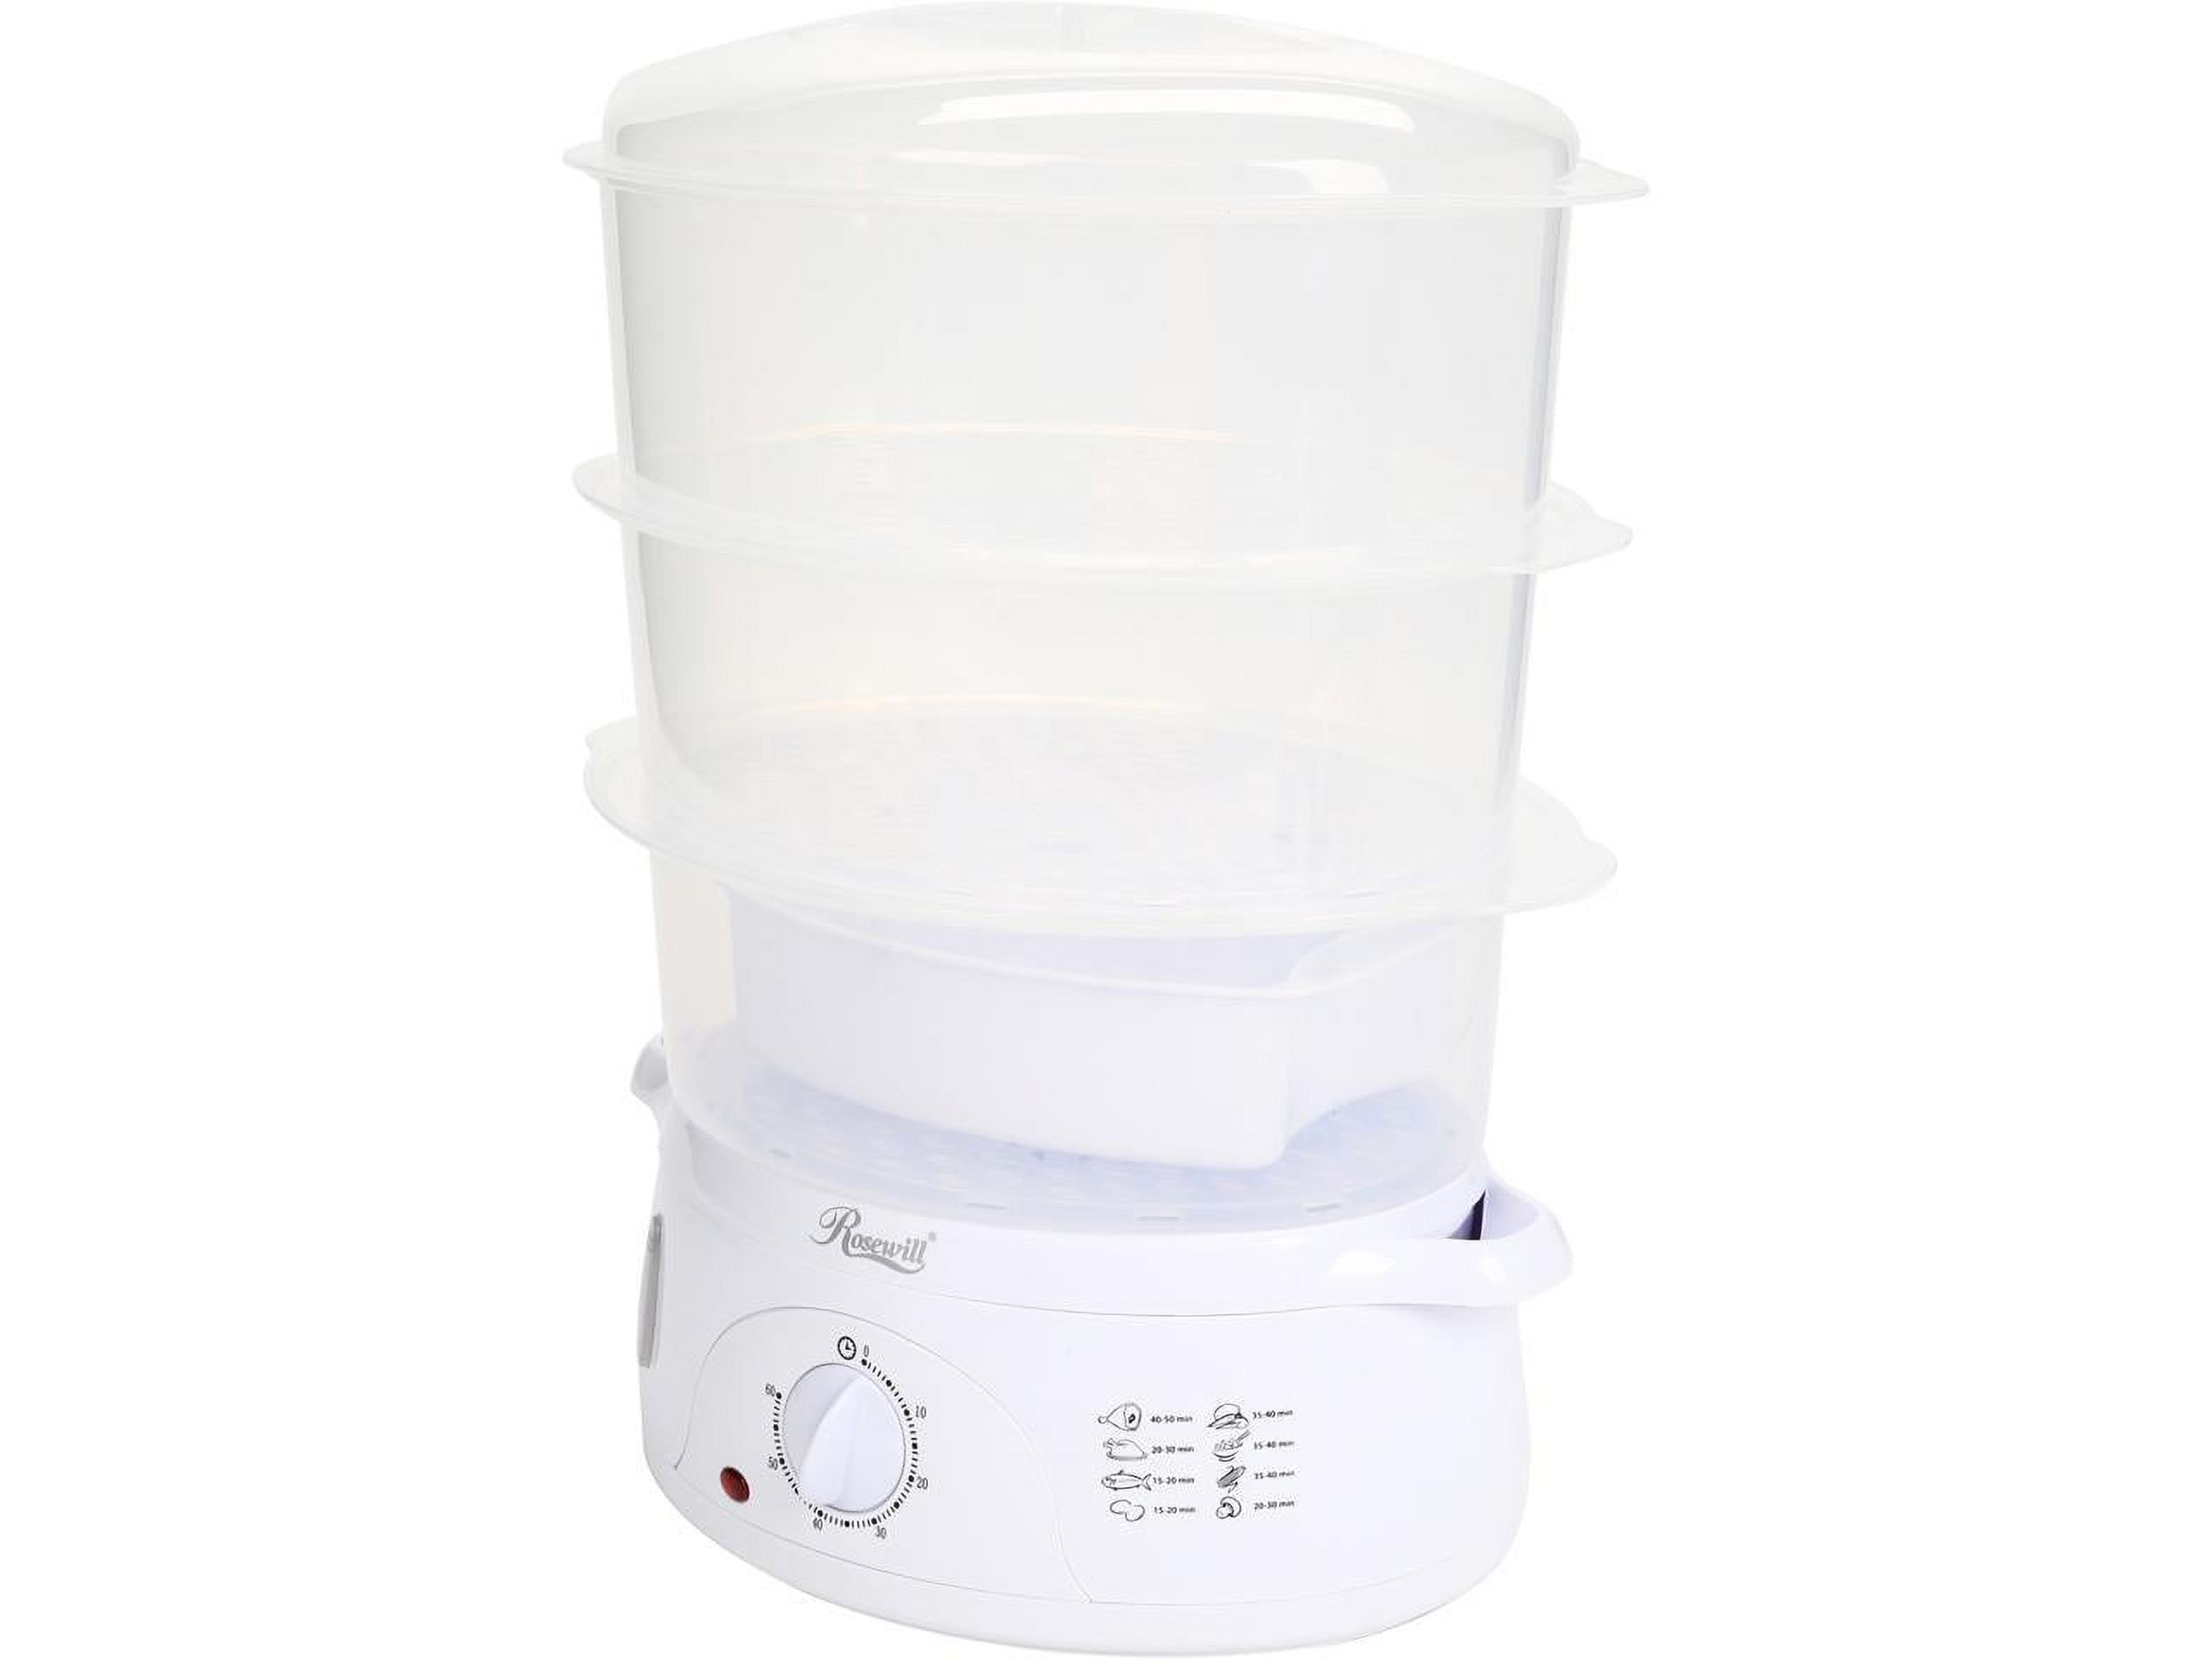 Rosewill Electric Food Steamer 9.5 Quart, Vegetable Steamer and Rice Cooker with BPA Free 3 Tier Stackable Baskets and Egg Holders RHST-15001 - image 4 of 5